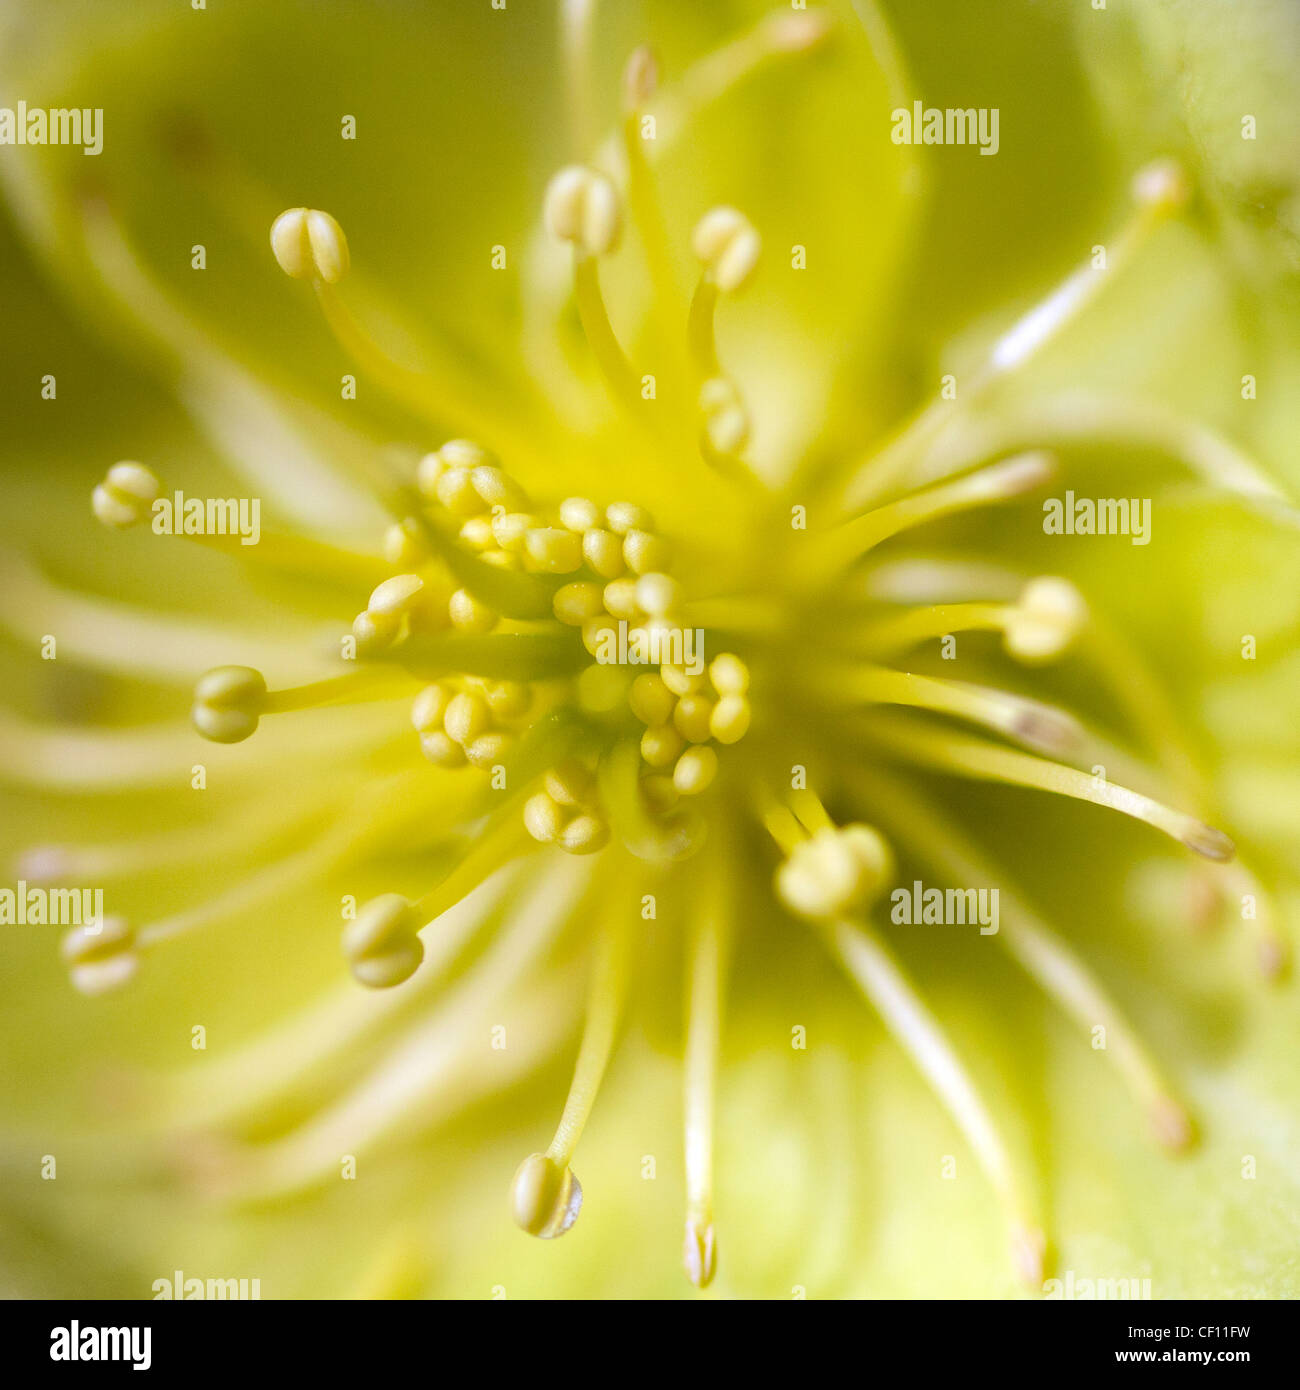 Macro photograph of the inside and stamens of a lime colored Christmas Rose, which give an abstract concept of movement Stock Photo